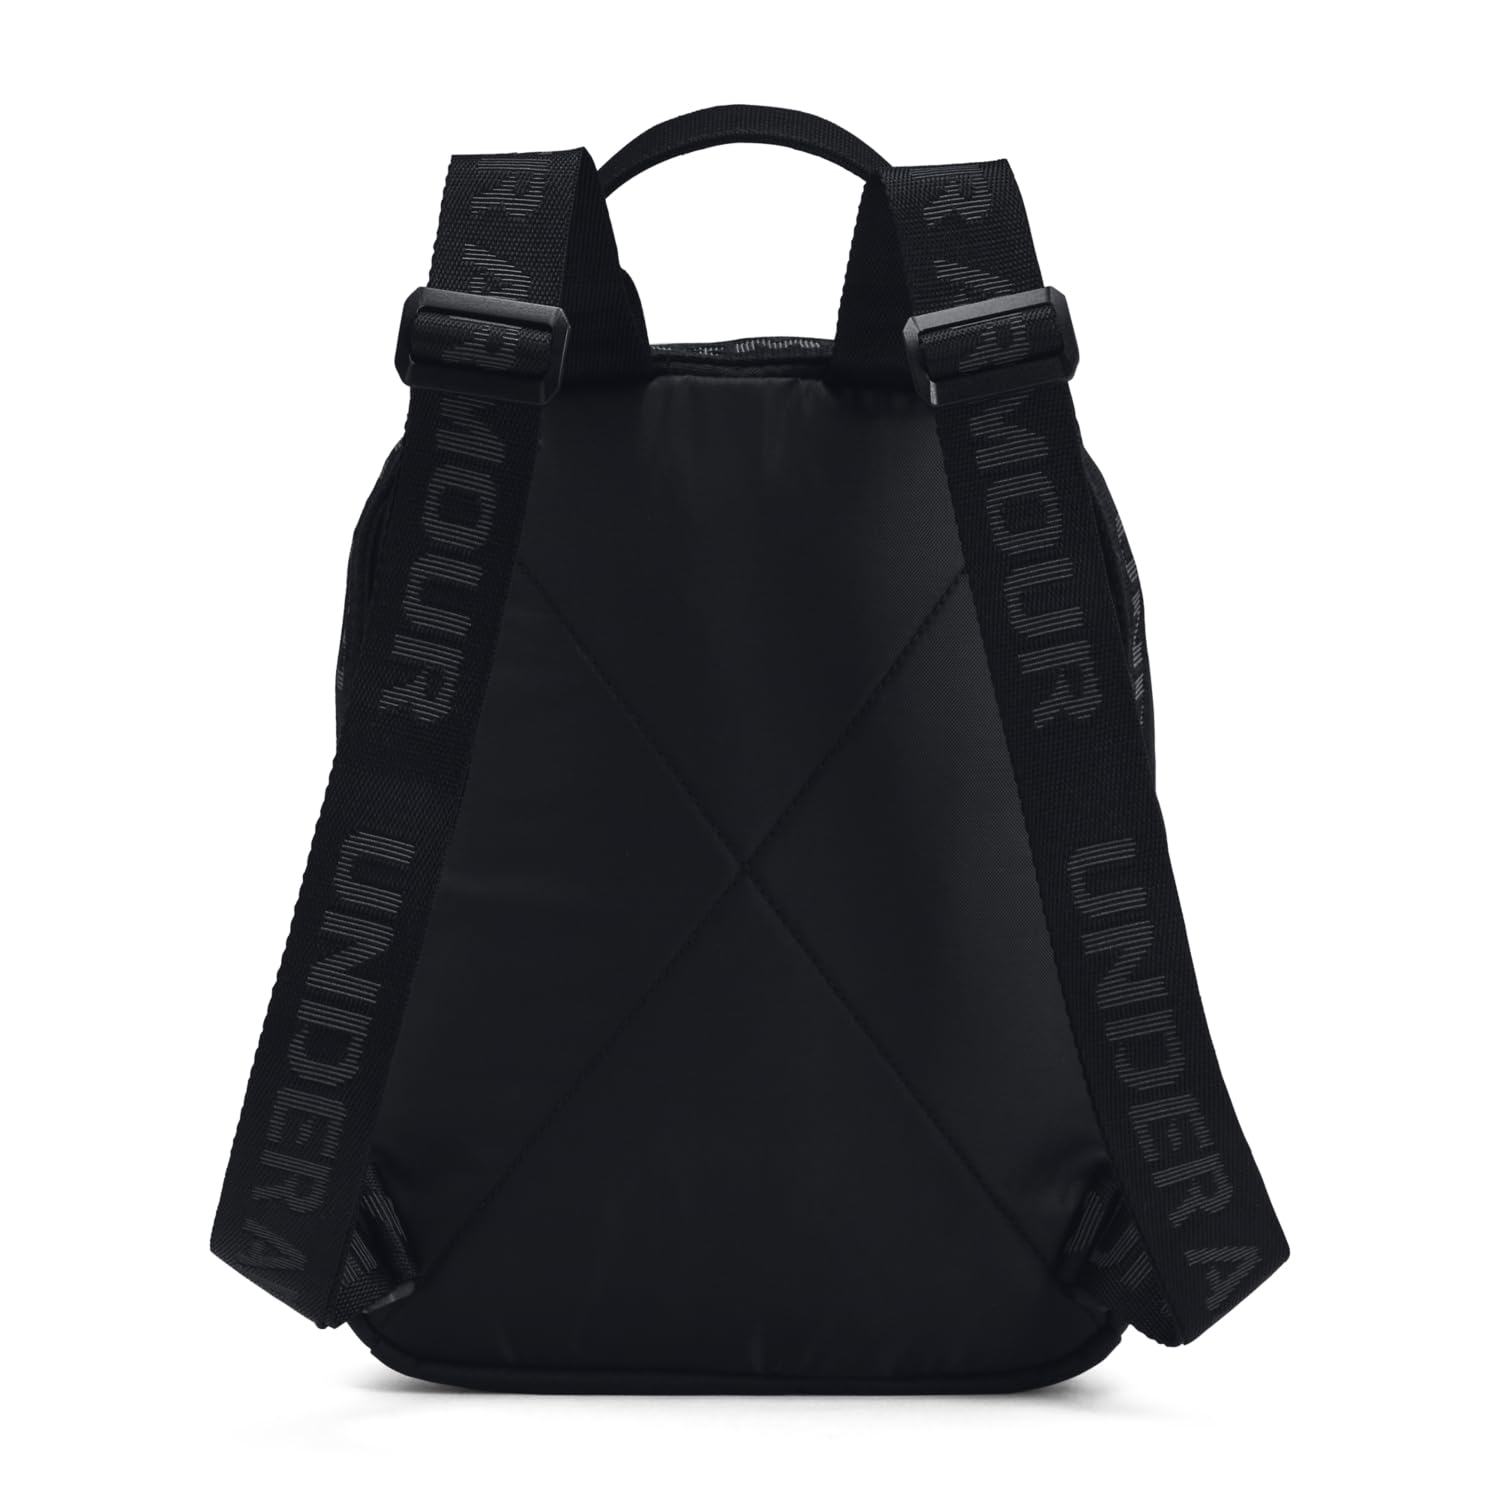 Under Armour Loudon Mini Backpack, (001) Black/Black/Reflective, One Size